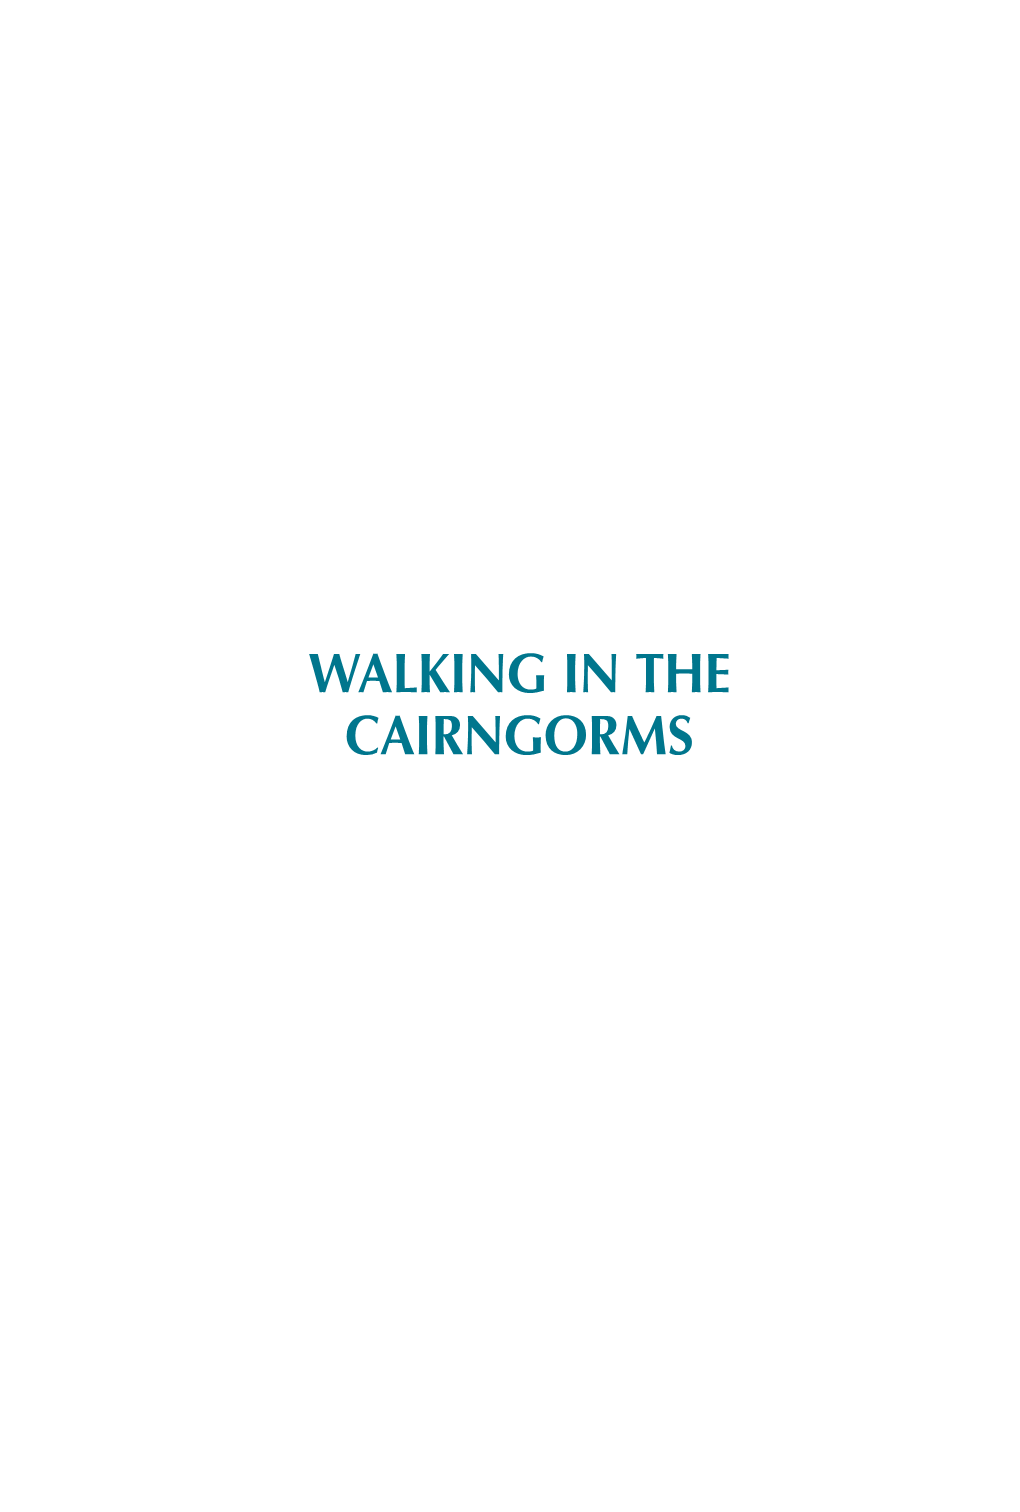 Walking in the Cairngorms